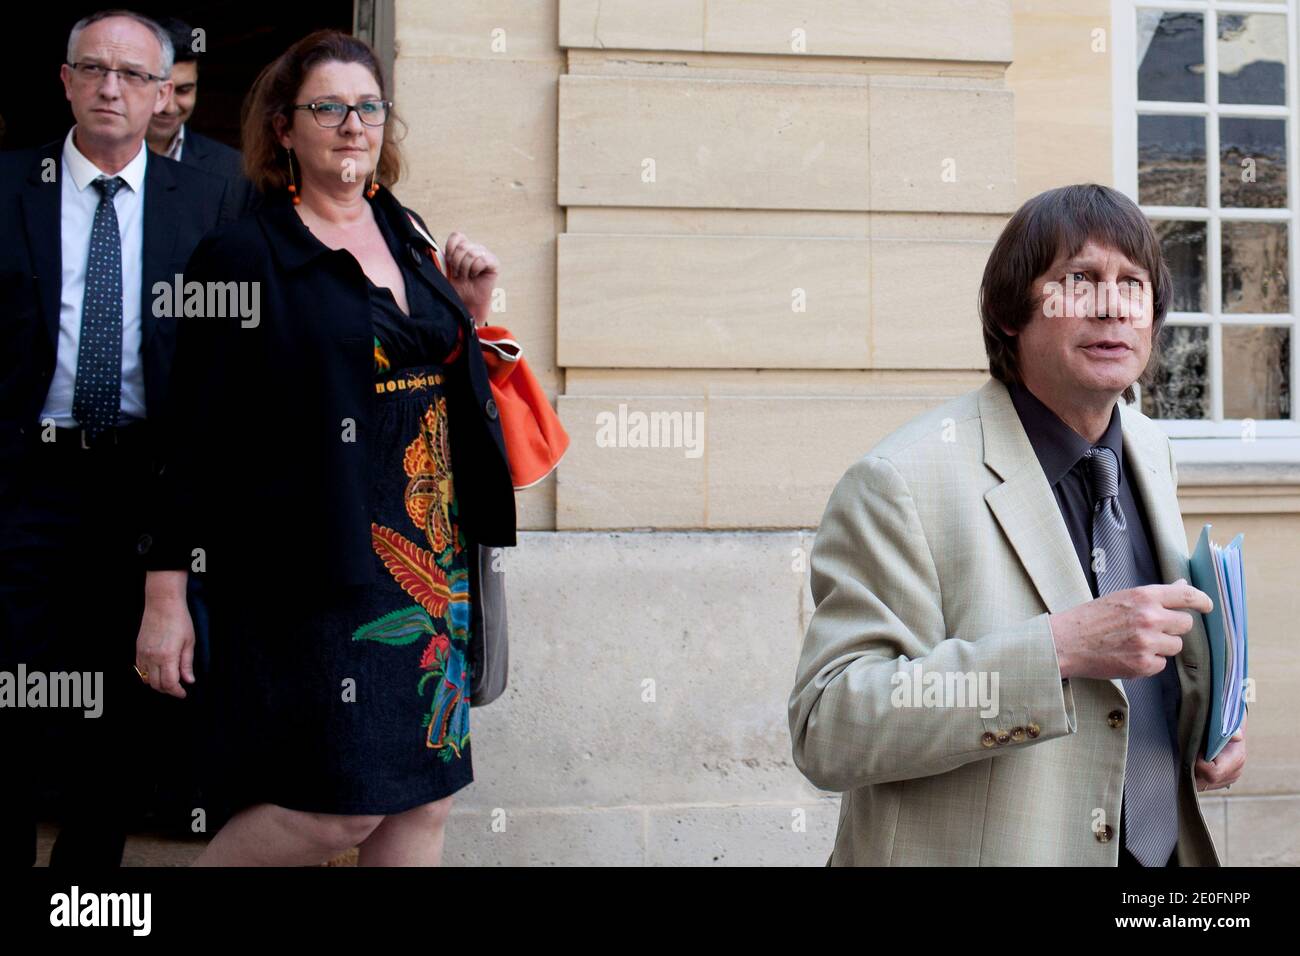 CGT labour union leader Bernard Thibault flanked by Eric Aubin leaves after a meeting with French Prime Minister, Jean-Marc Ayrault, at the Hotel Matignon, in Paris, France on May 29, 2012. Photo by Stephane Lemouton/ABACAPRESS.COM. Stock Photo